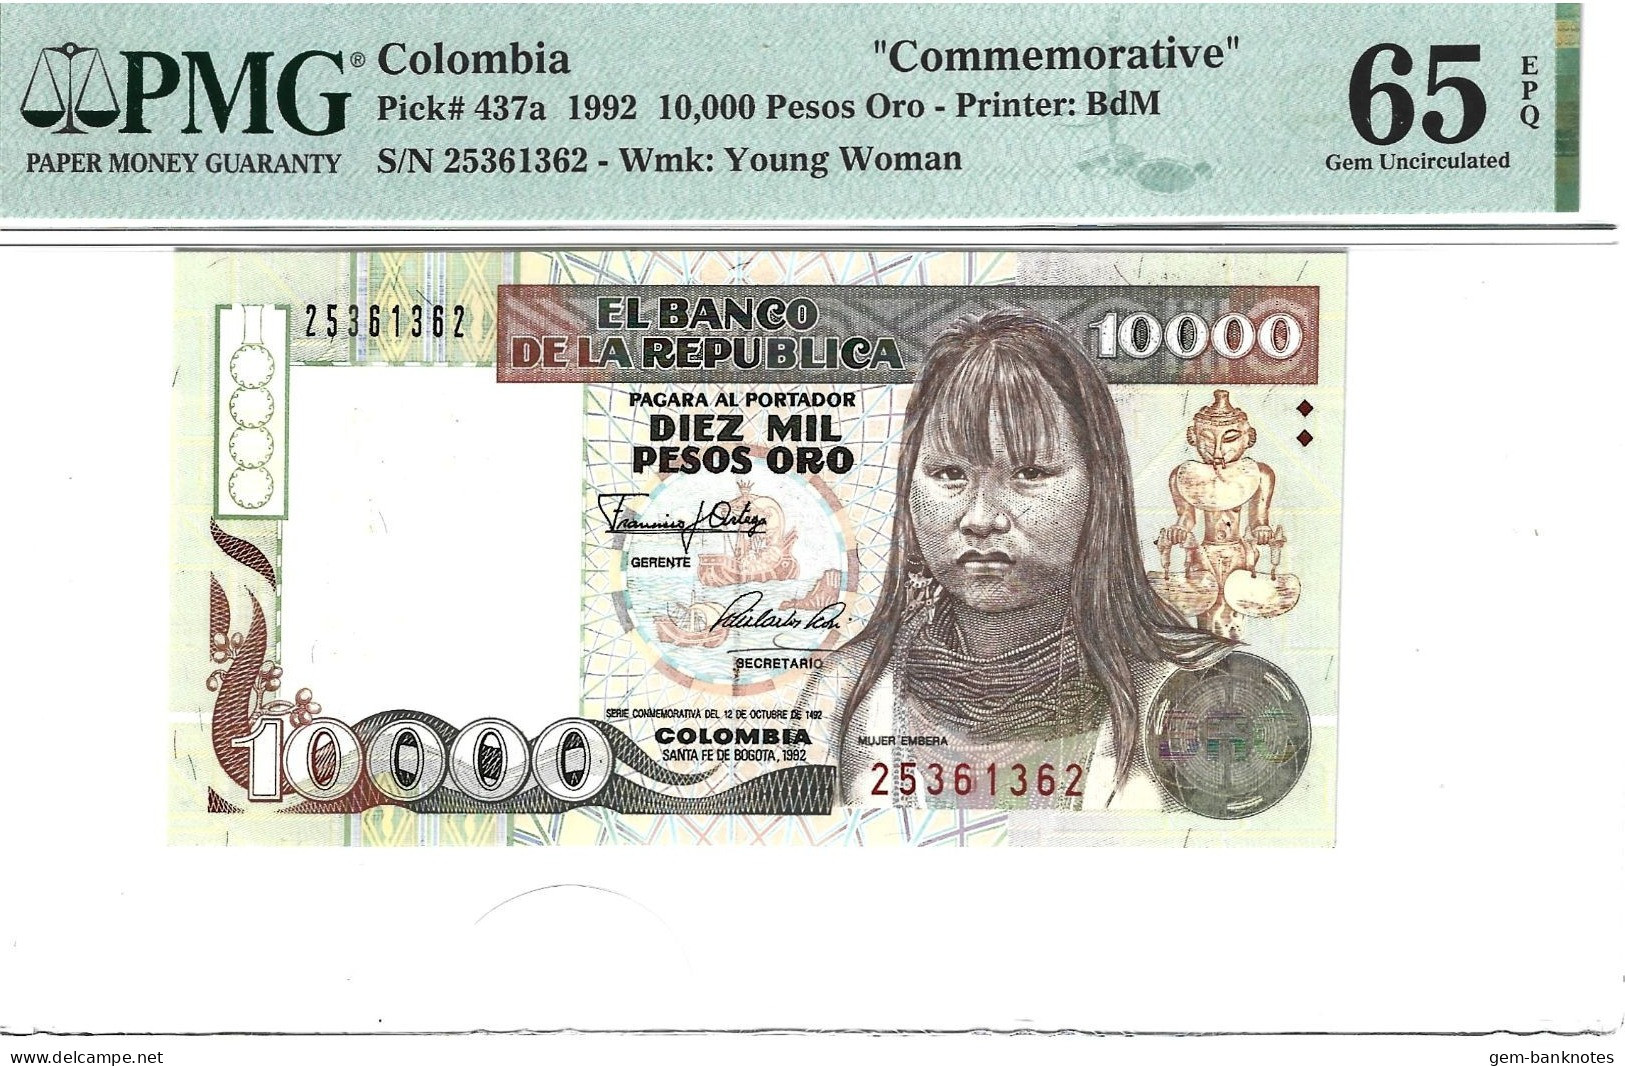 Colombia 10000 Pesos 1992 P437a Commemorative Graded 65 EPQ Gem Uncirculated By PMG - Colombie